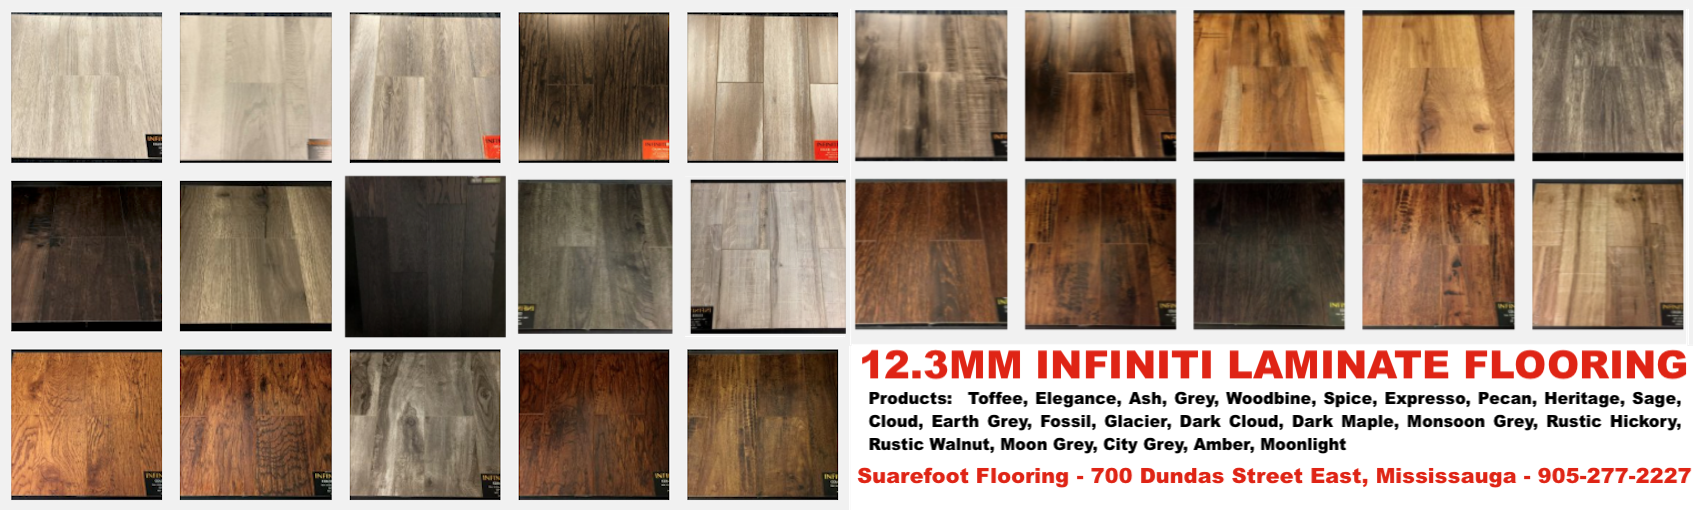 Download 12mm Infiniti Laminate Flooring Products Plank Png